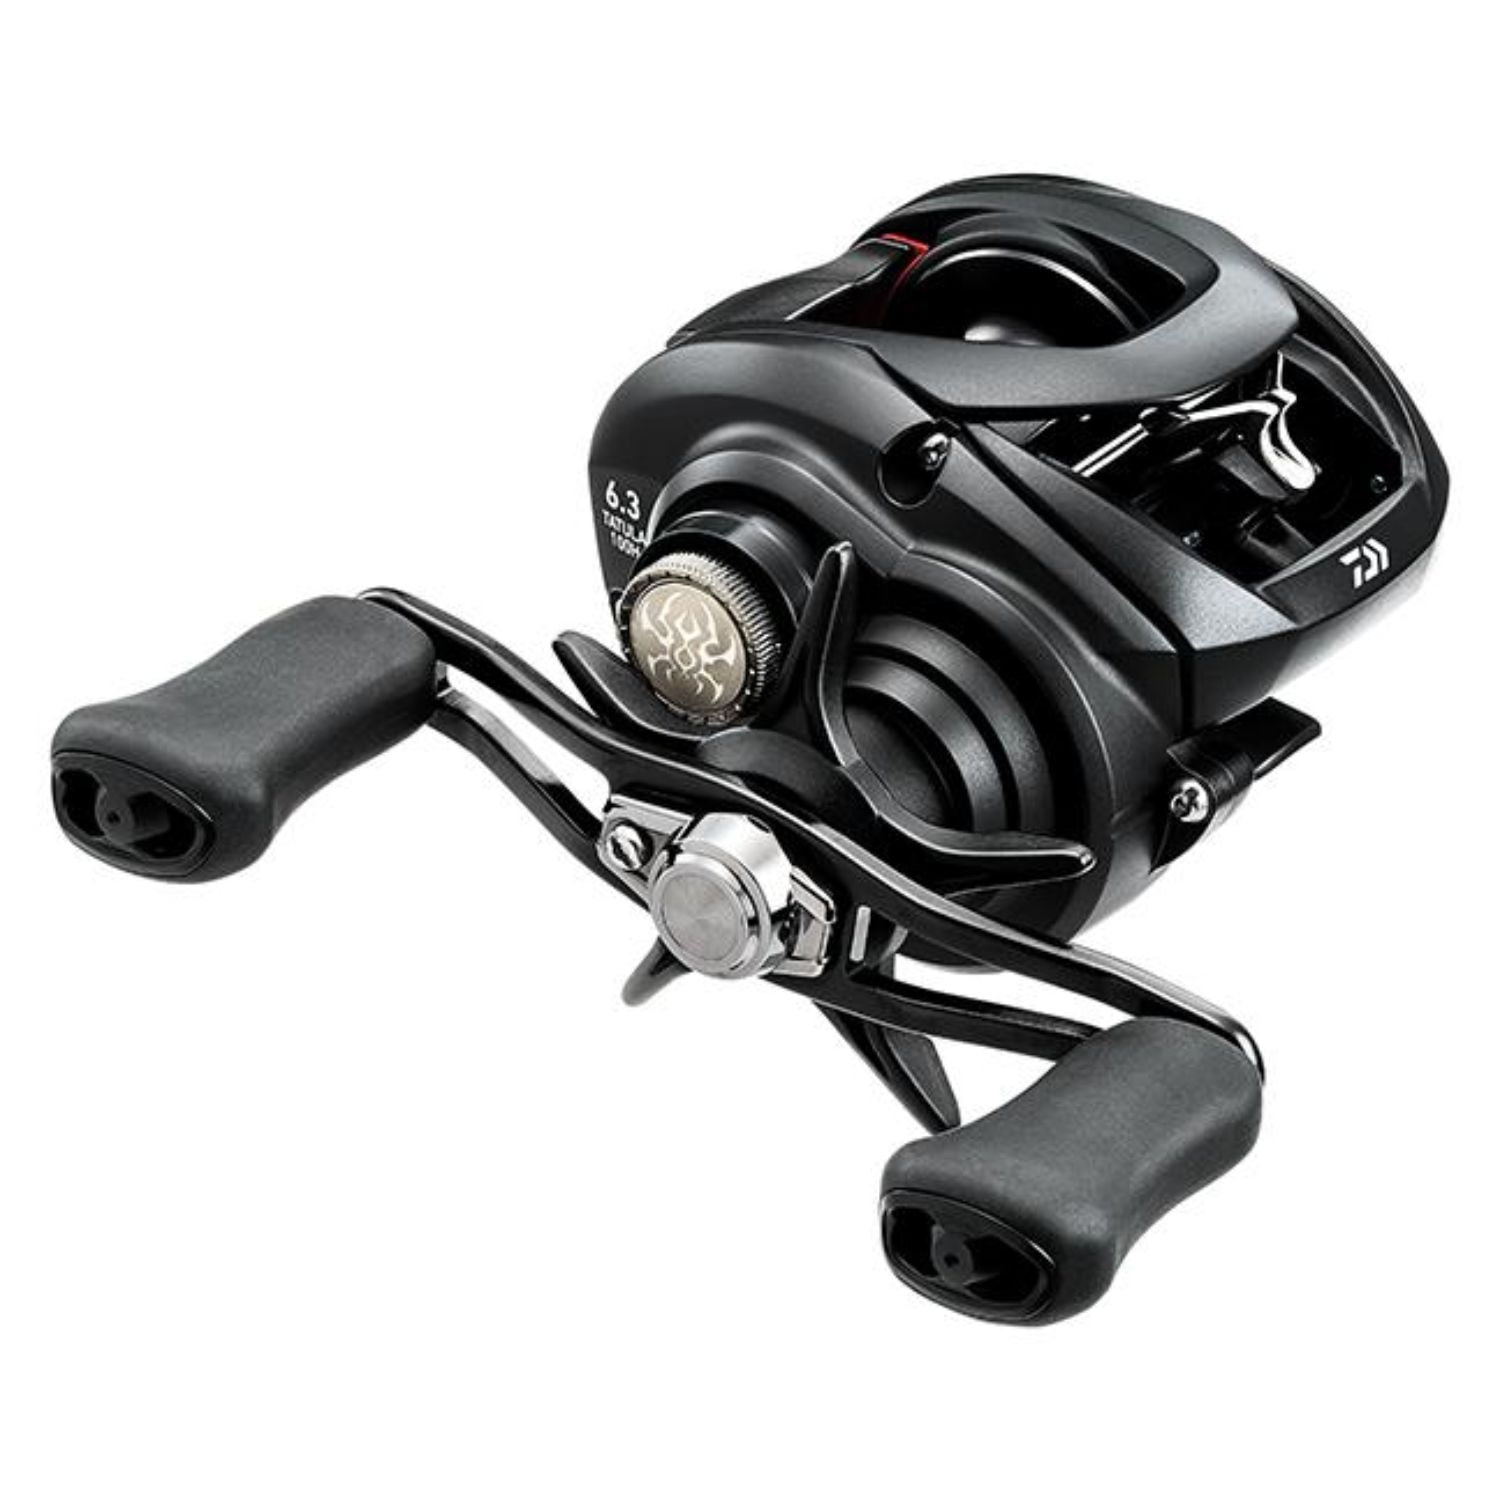 Daiwa CA80 CA80XS Right-Handed Baitcasting Reel for sale online 